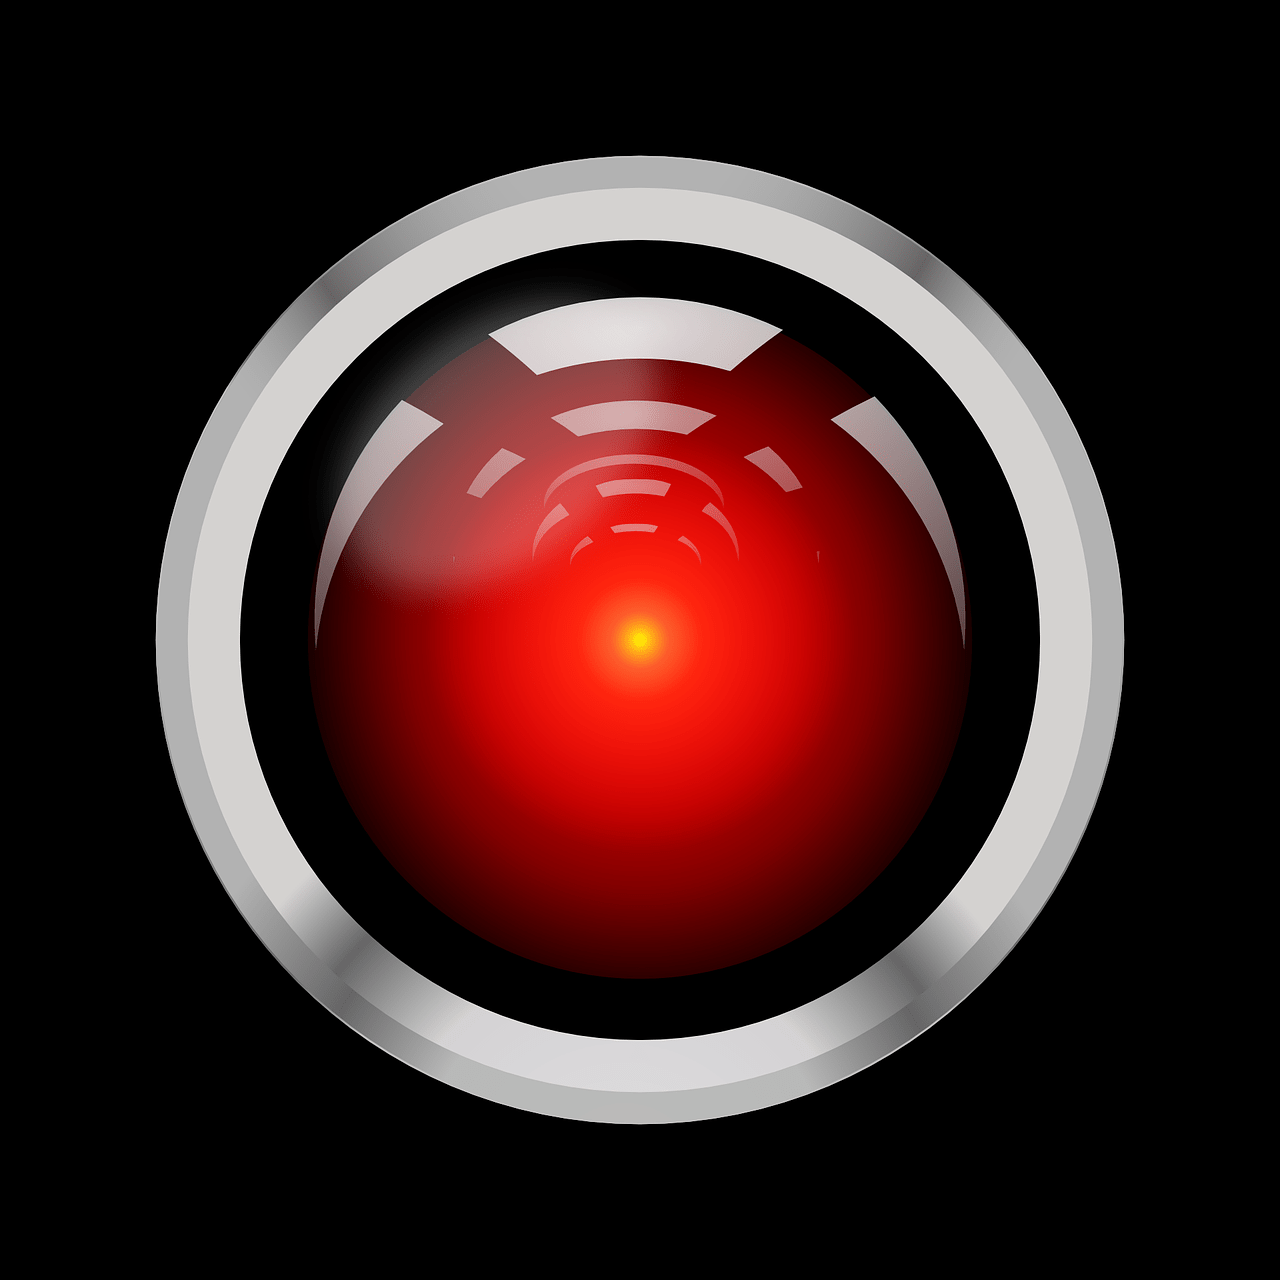 artificial intelligence, hal 9000 computer, space odyssey-155161.jpg